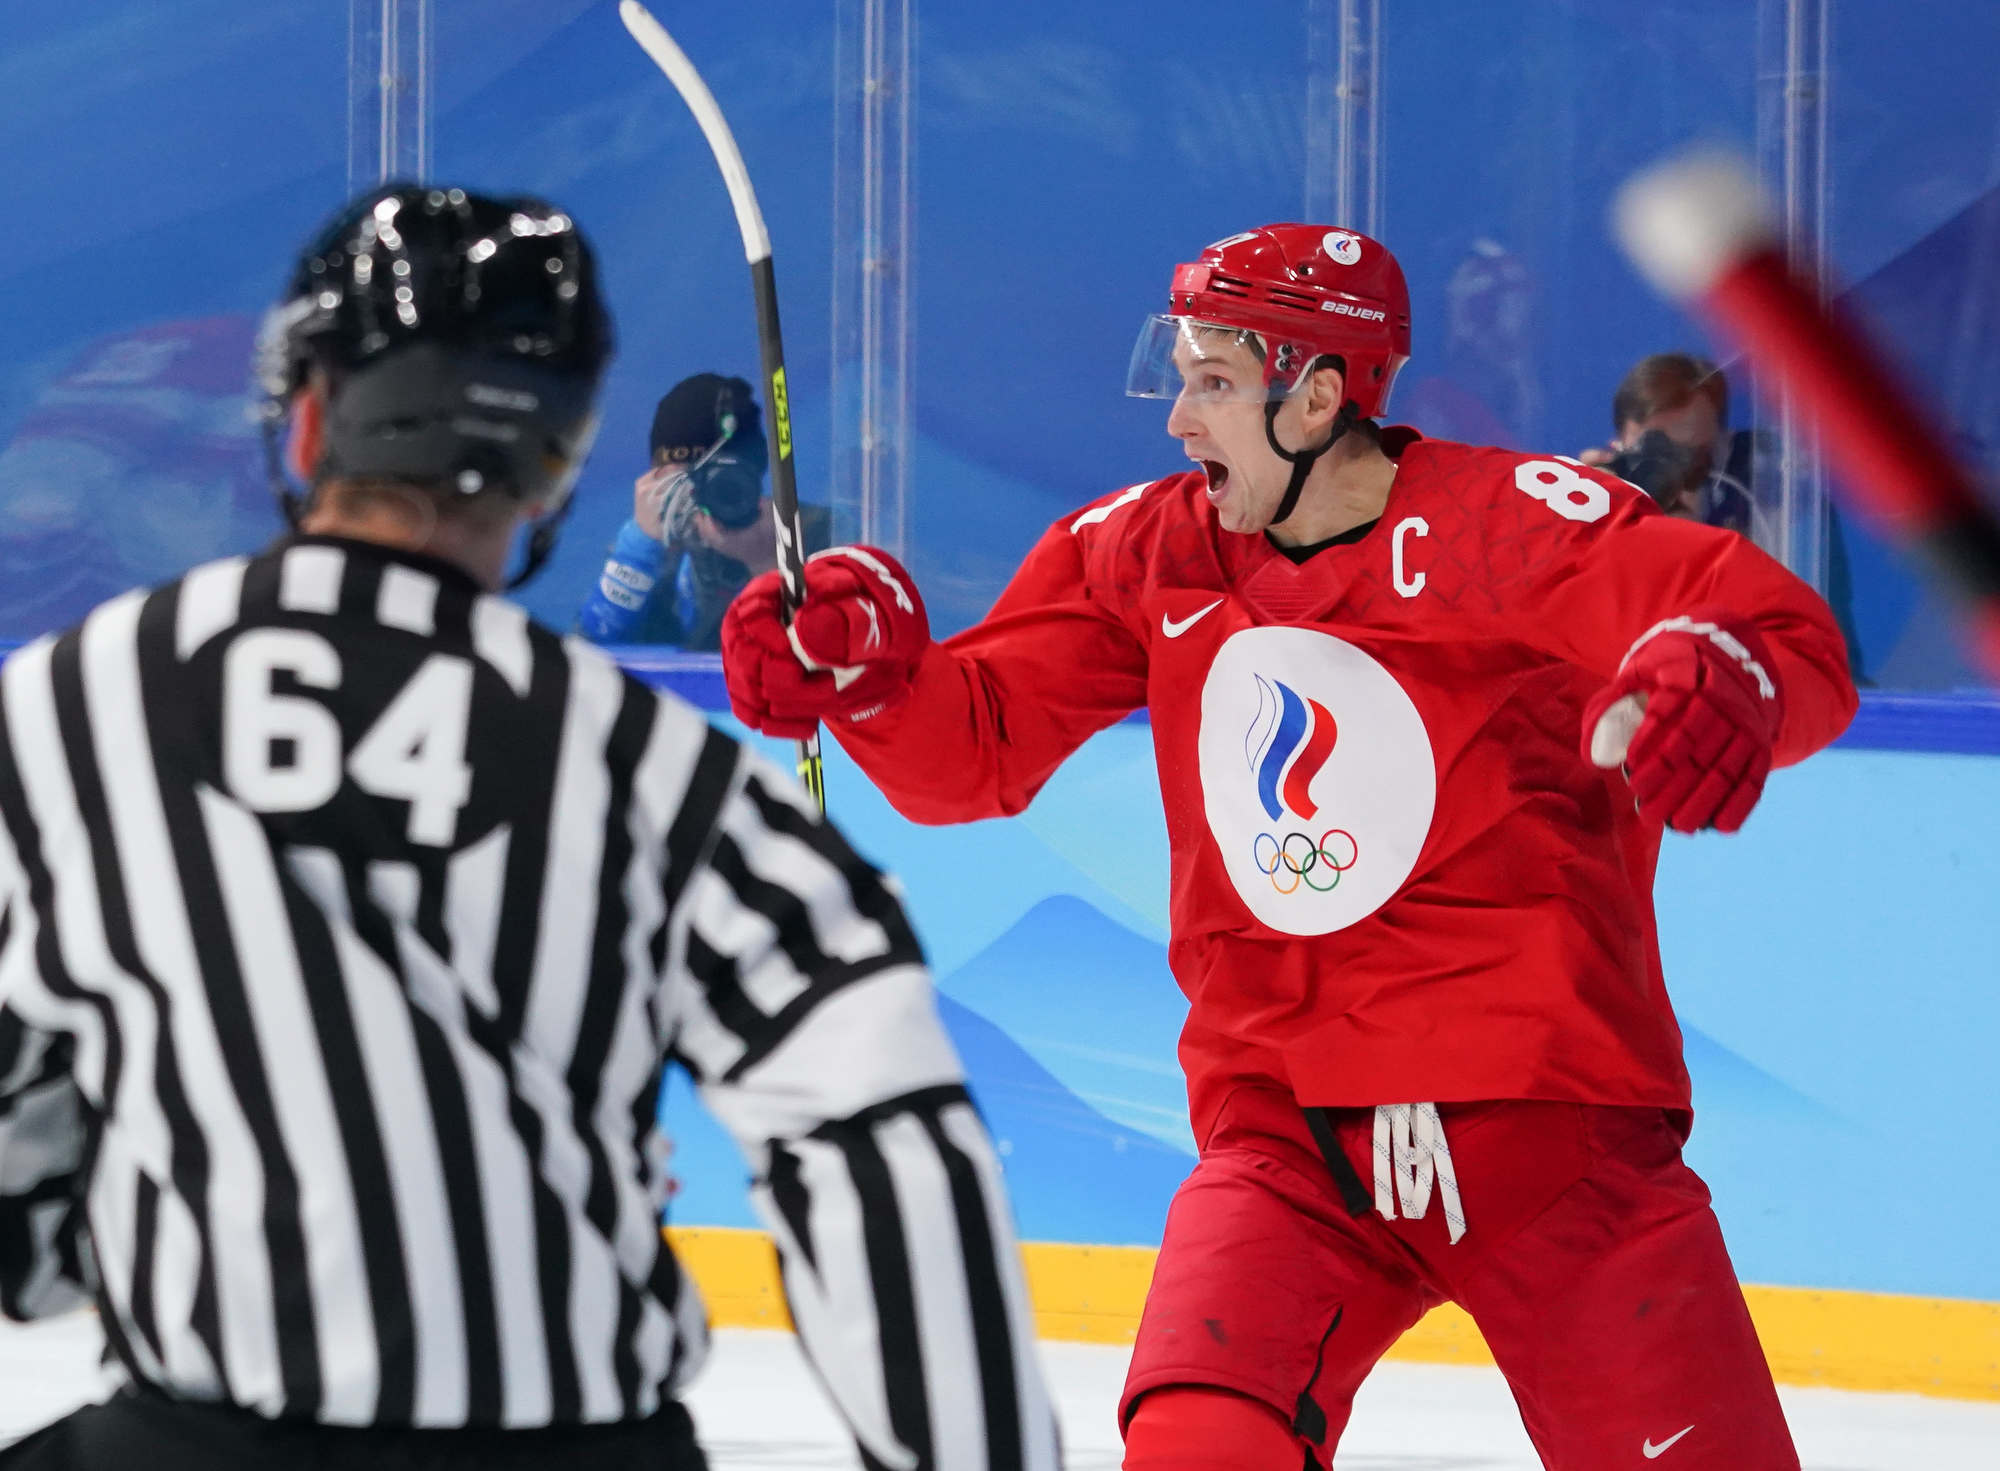 ROC's NHL reject Nikita Gusev aims to prove a point at Beijing 2022